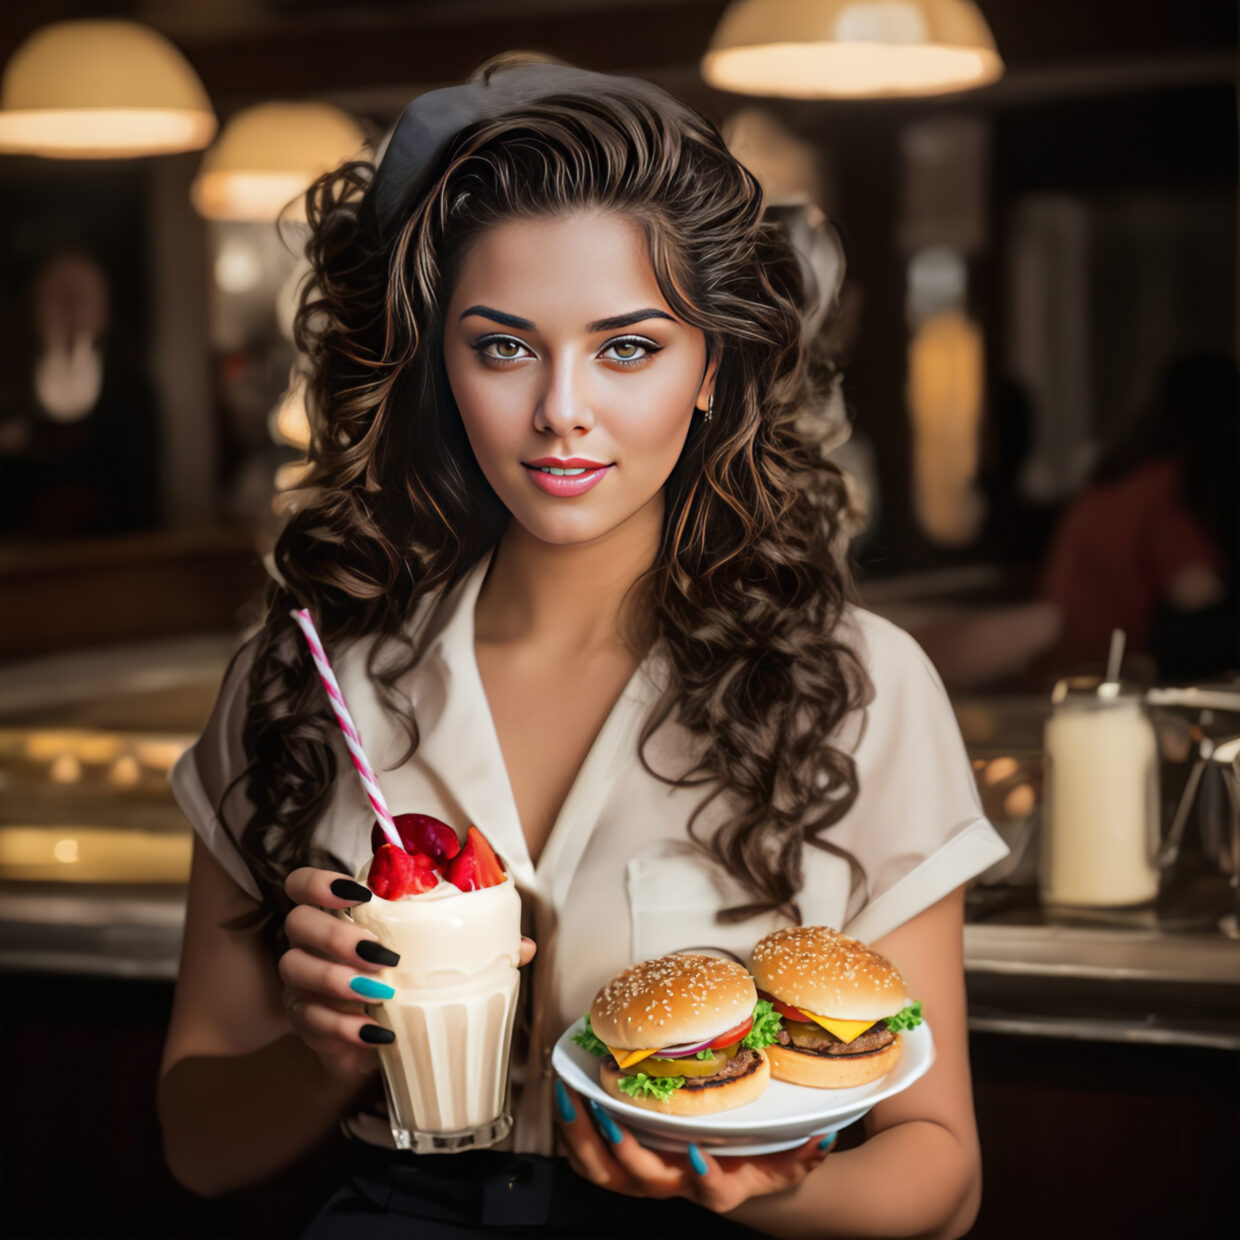 3Daizy in a 50's diner, holding a milkshake and burgers.